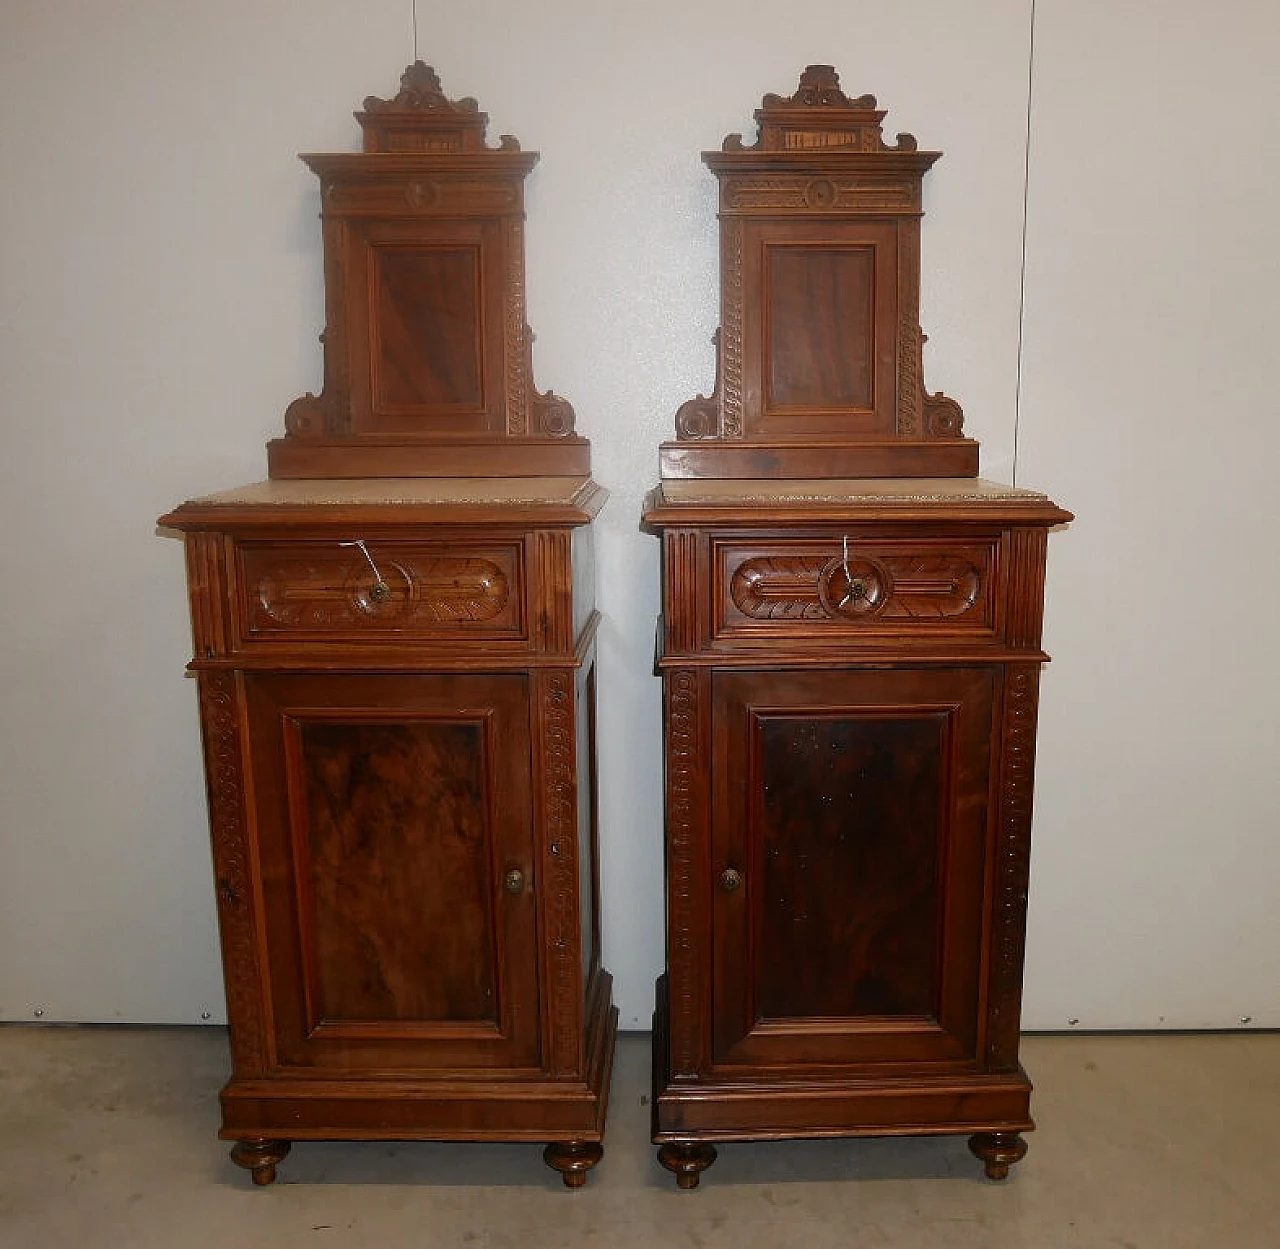 Pair of walnut bedside tables with grit top, early 20th century 1378220